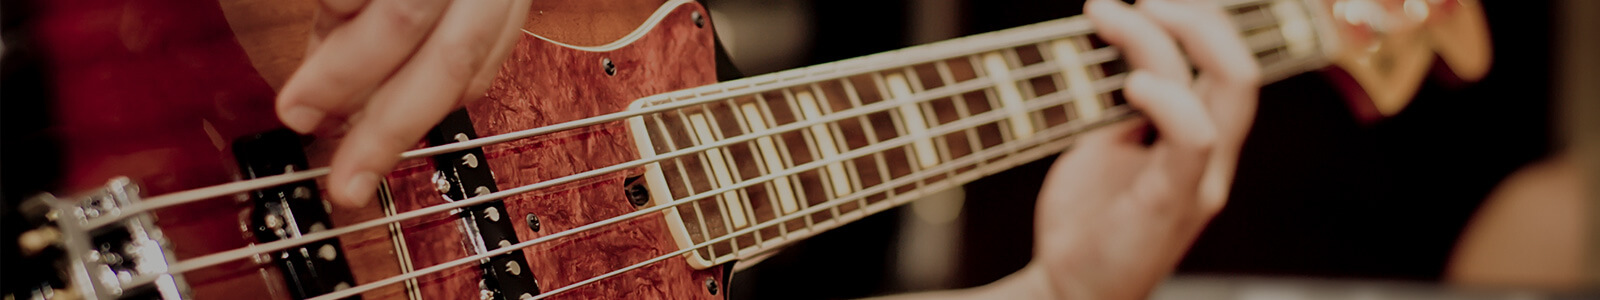 close up view of a bass guitar played by a man in the room